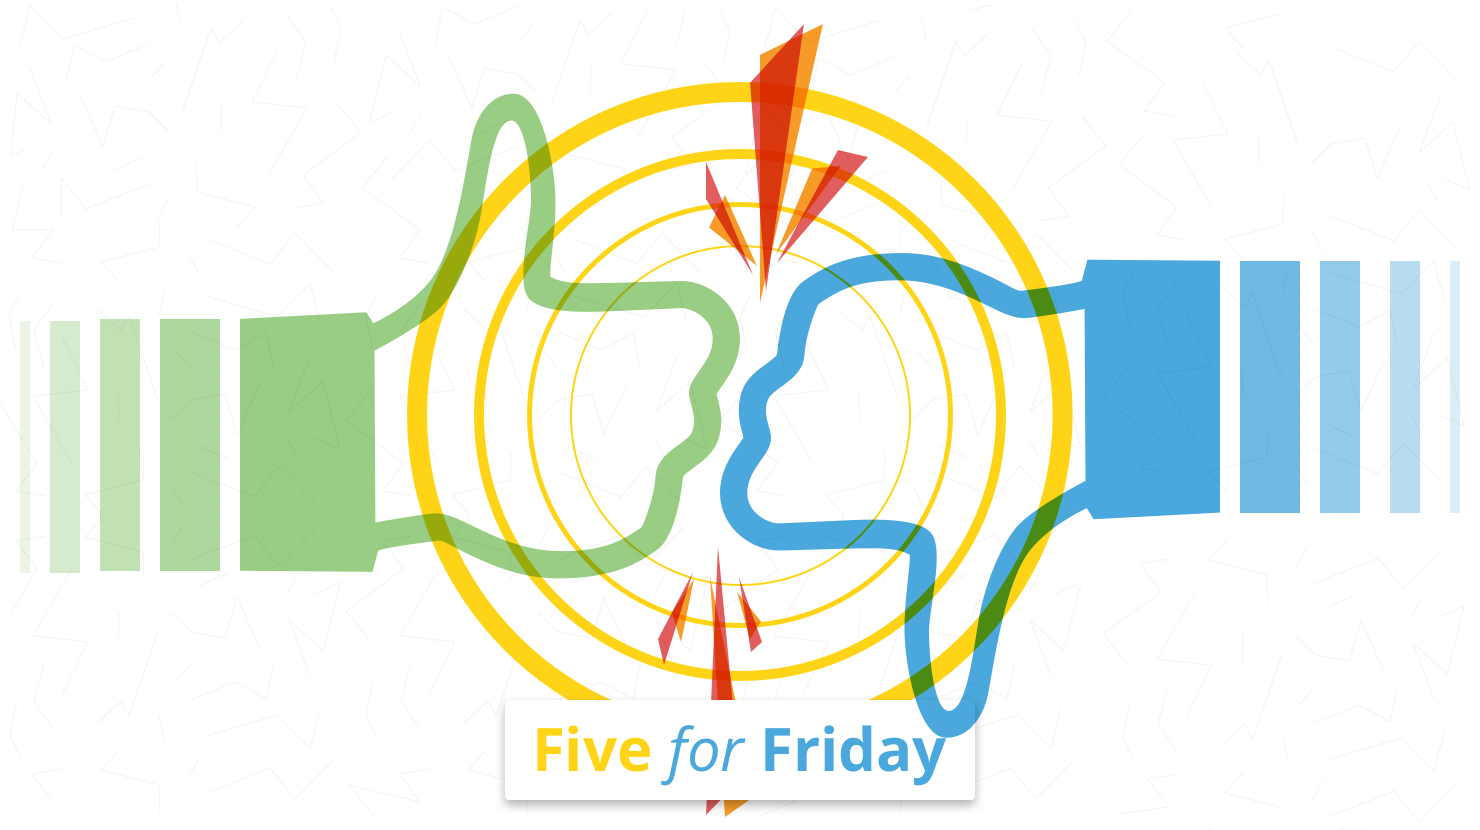 Five for Friday: Conflict at work